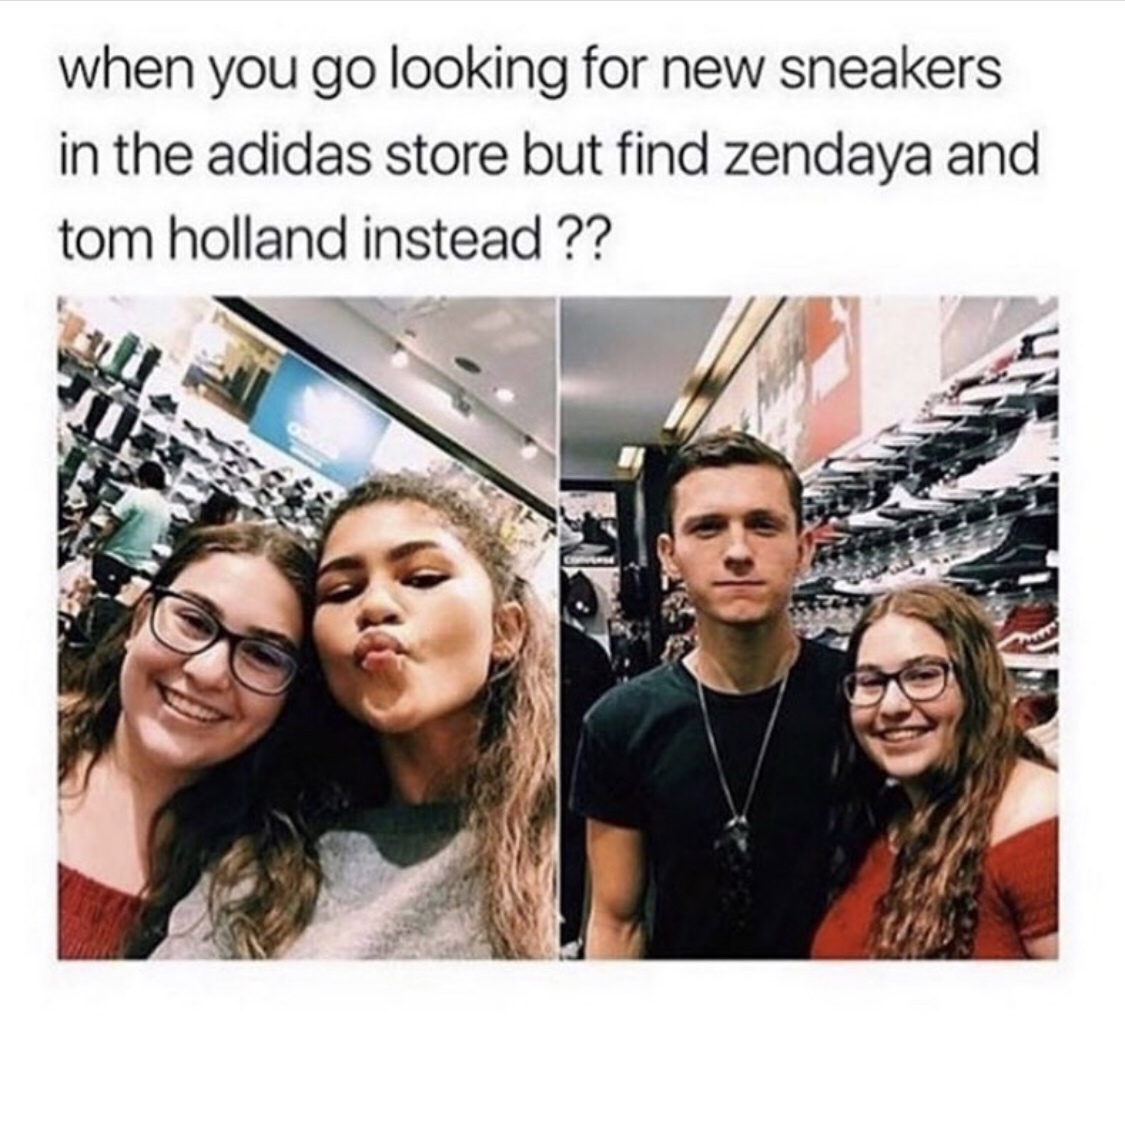 friendship - when you go looking for new sneakers in the adidas store but find zendaya and tom holland instead ??